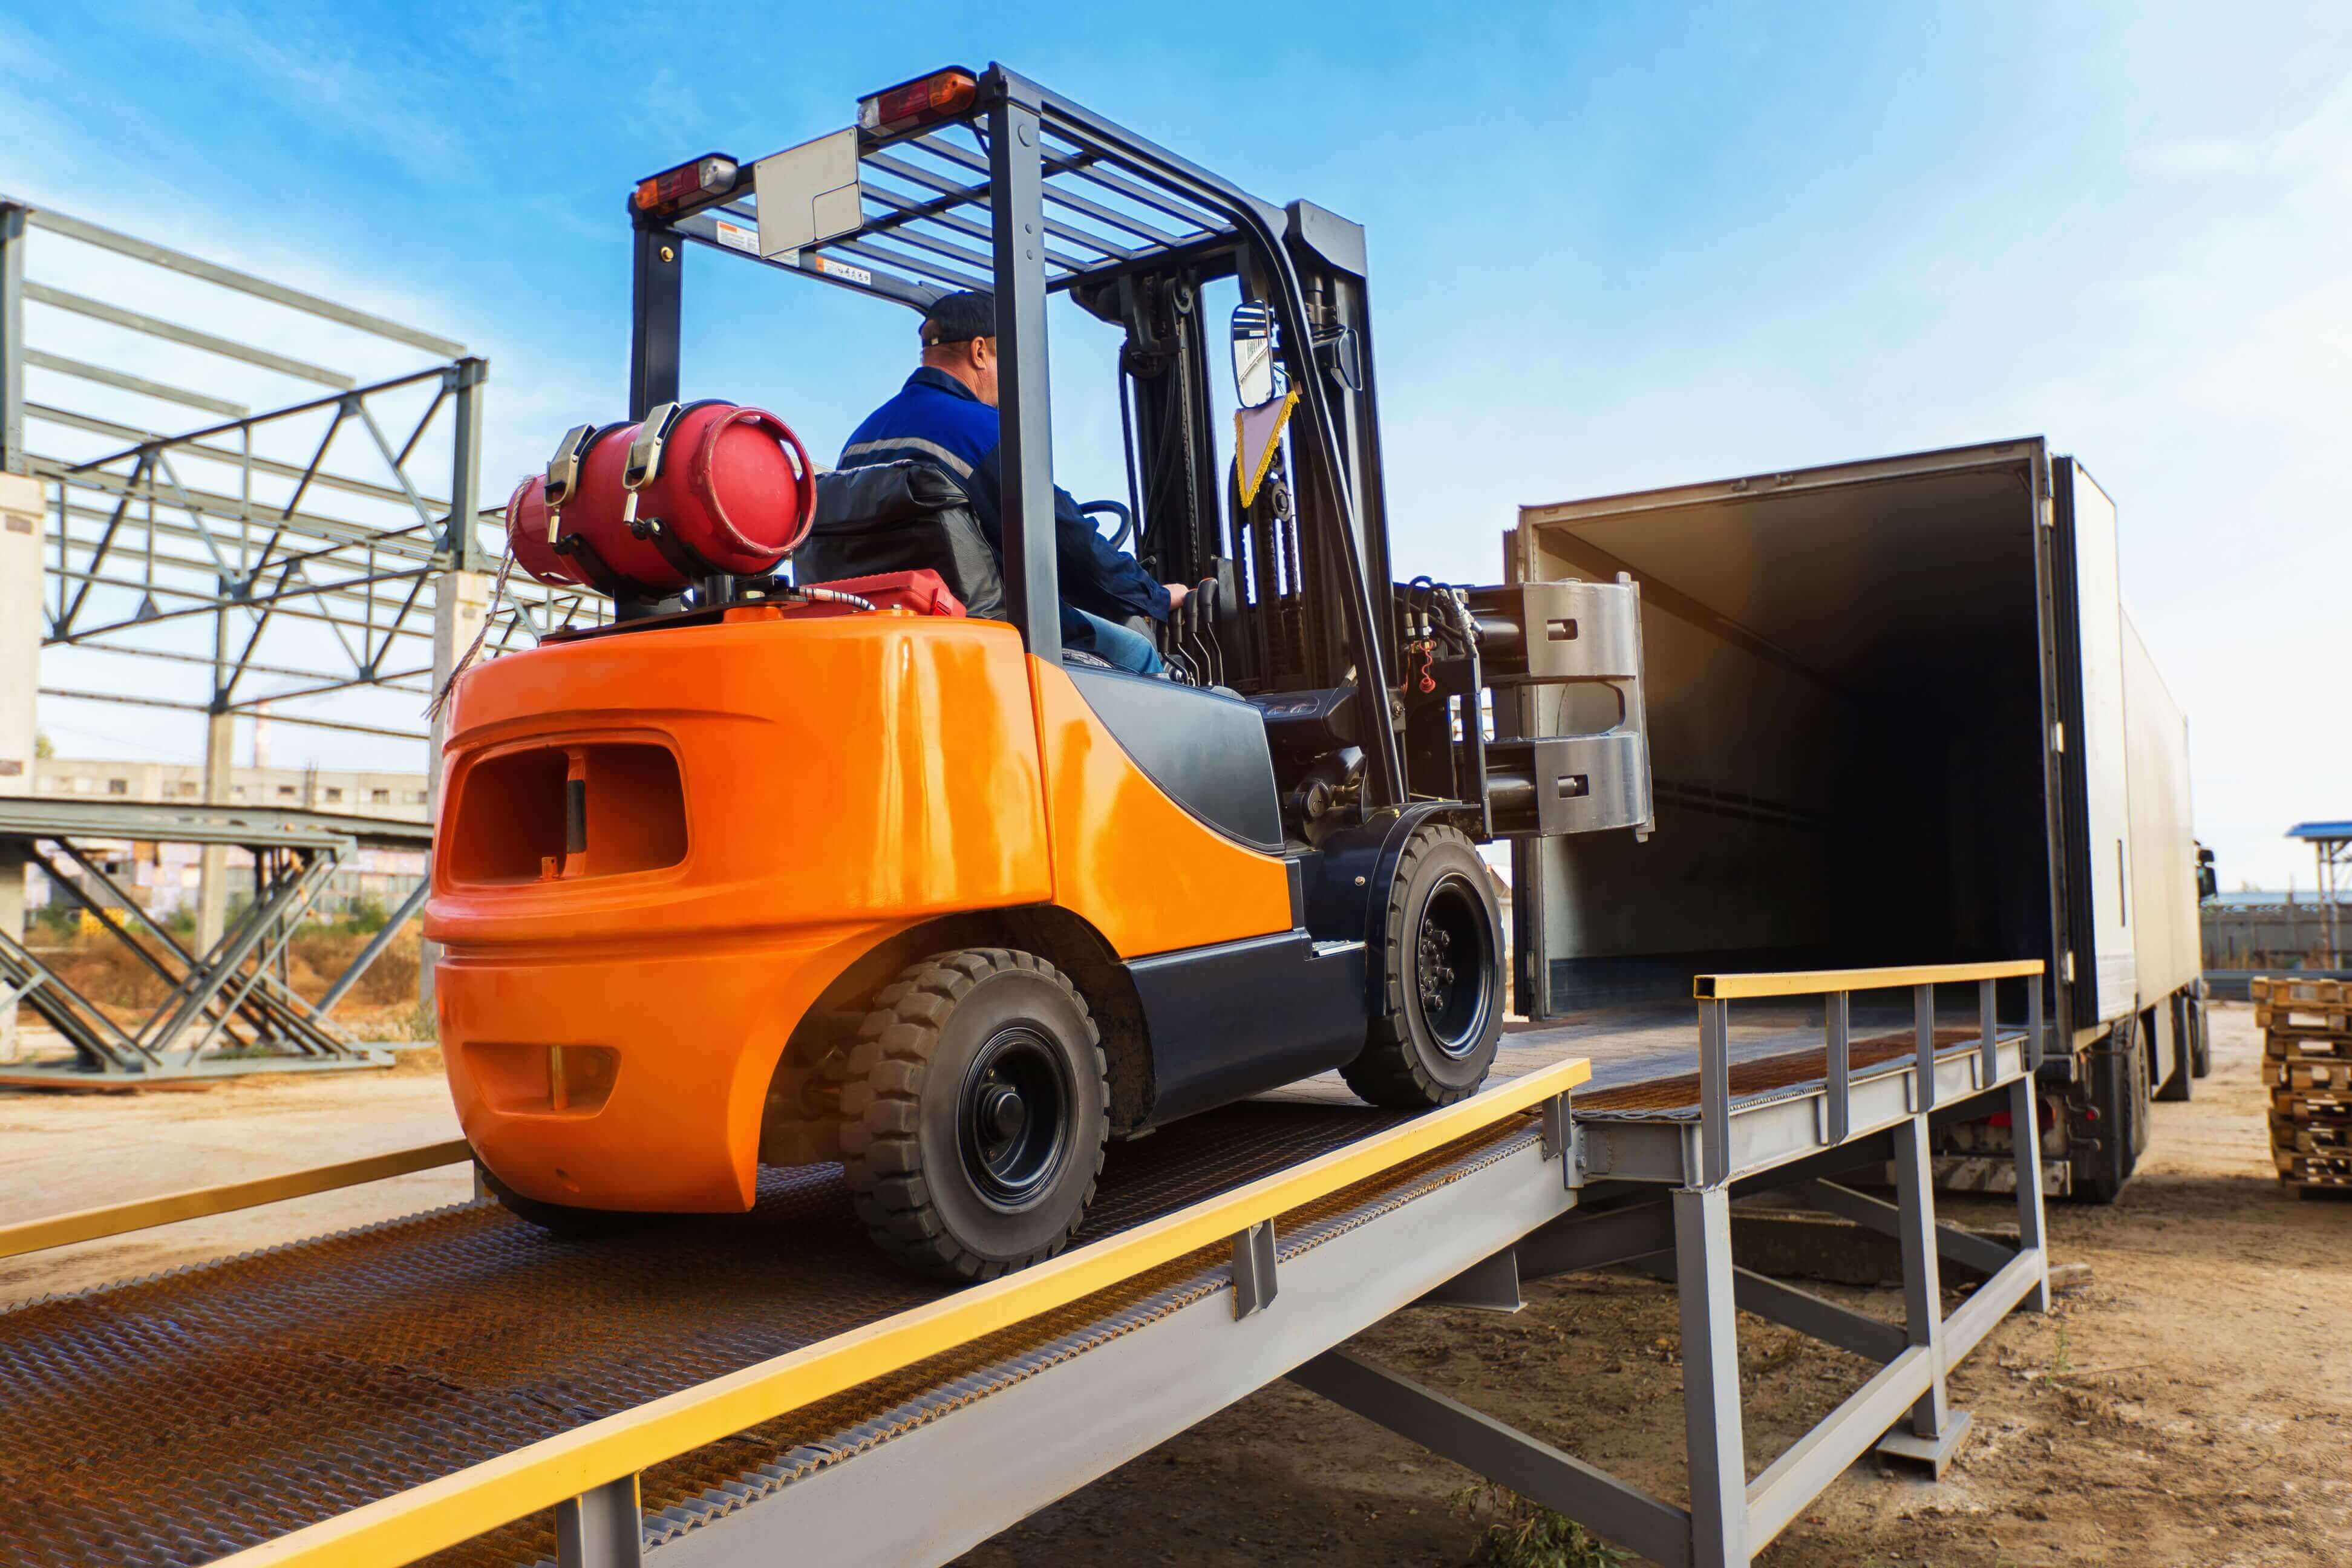 Forklift operator loading cargo into trailer at a warehouse